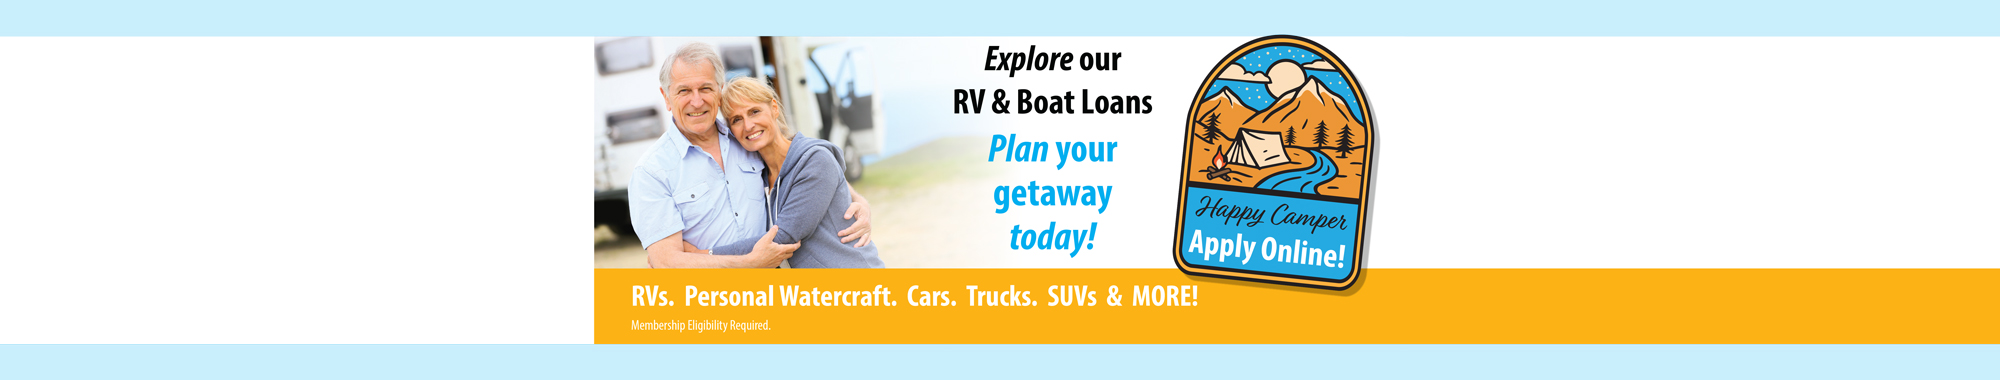 Explore our RV & Boat Loans -  Plan your getaway today! RVs, Personal watercraft, Cars, Trucks, SUVs and MORE! Happy Camper - Apply Online!